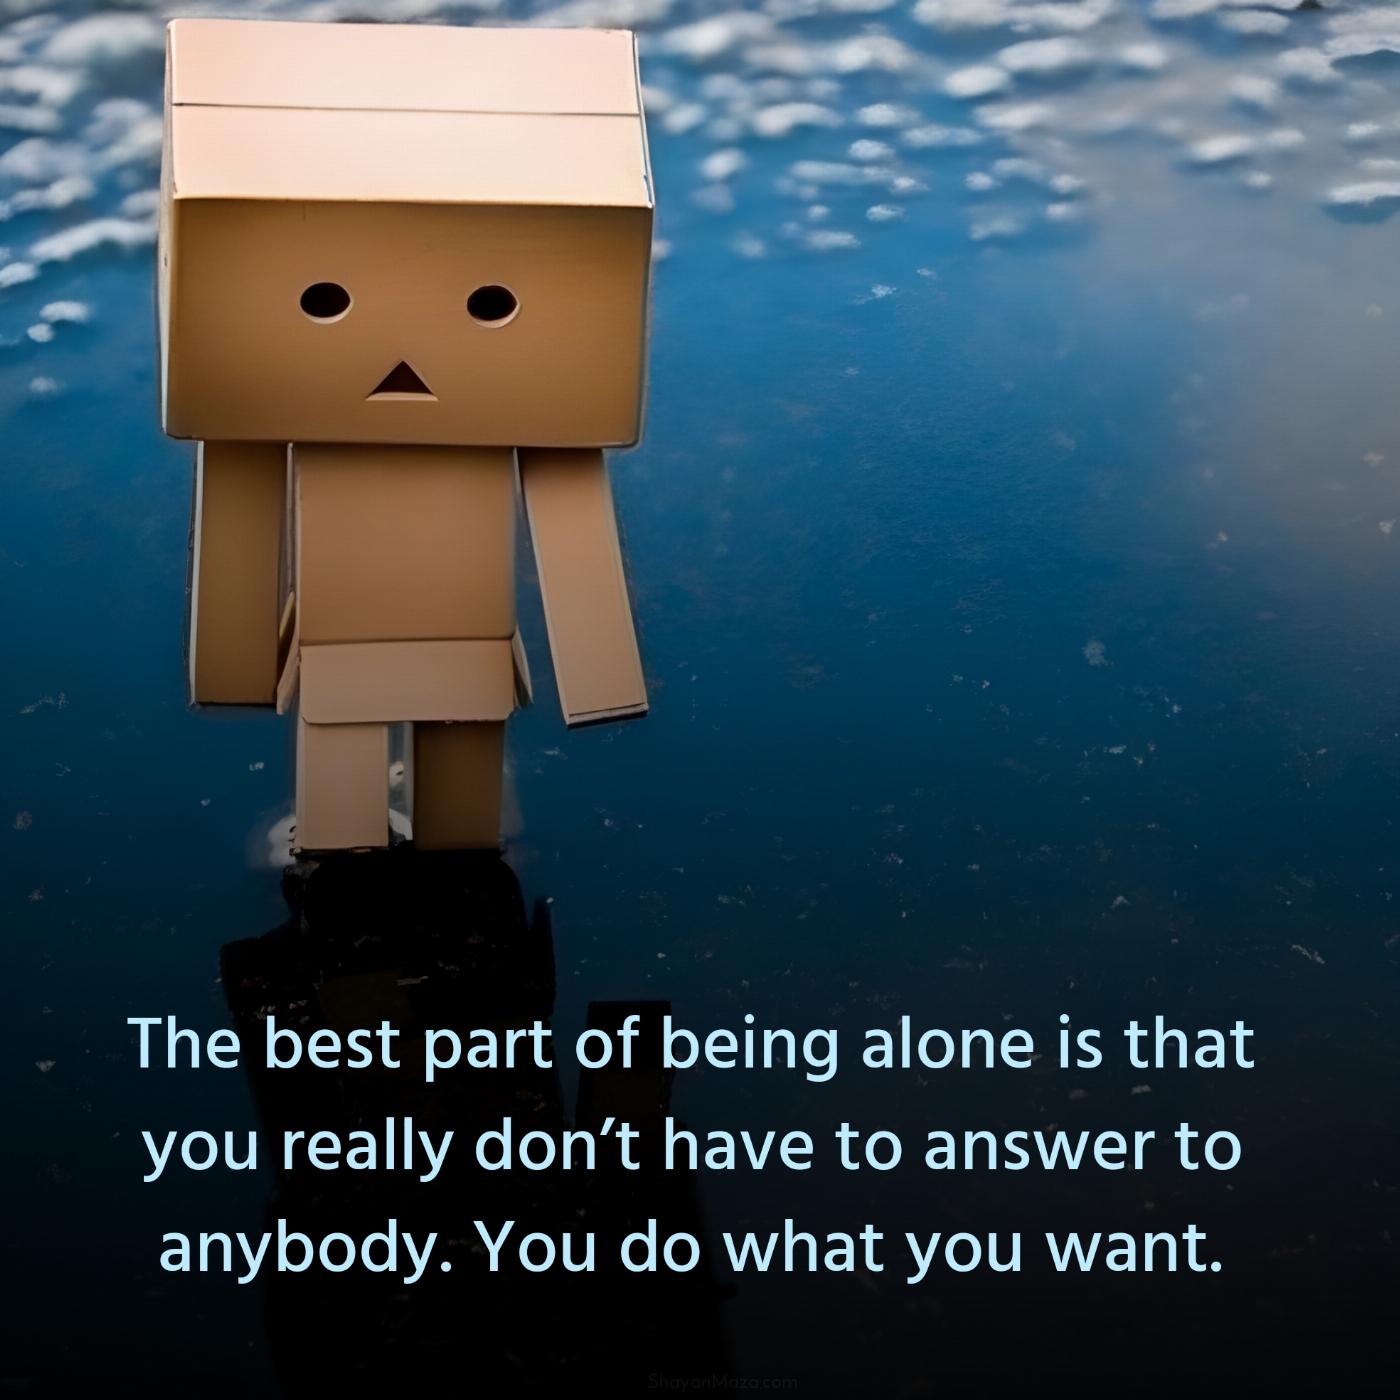 The best part of being alone is that you really dont have to answer